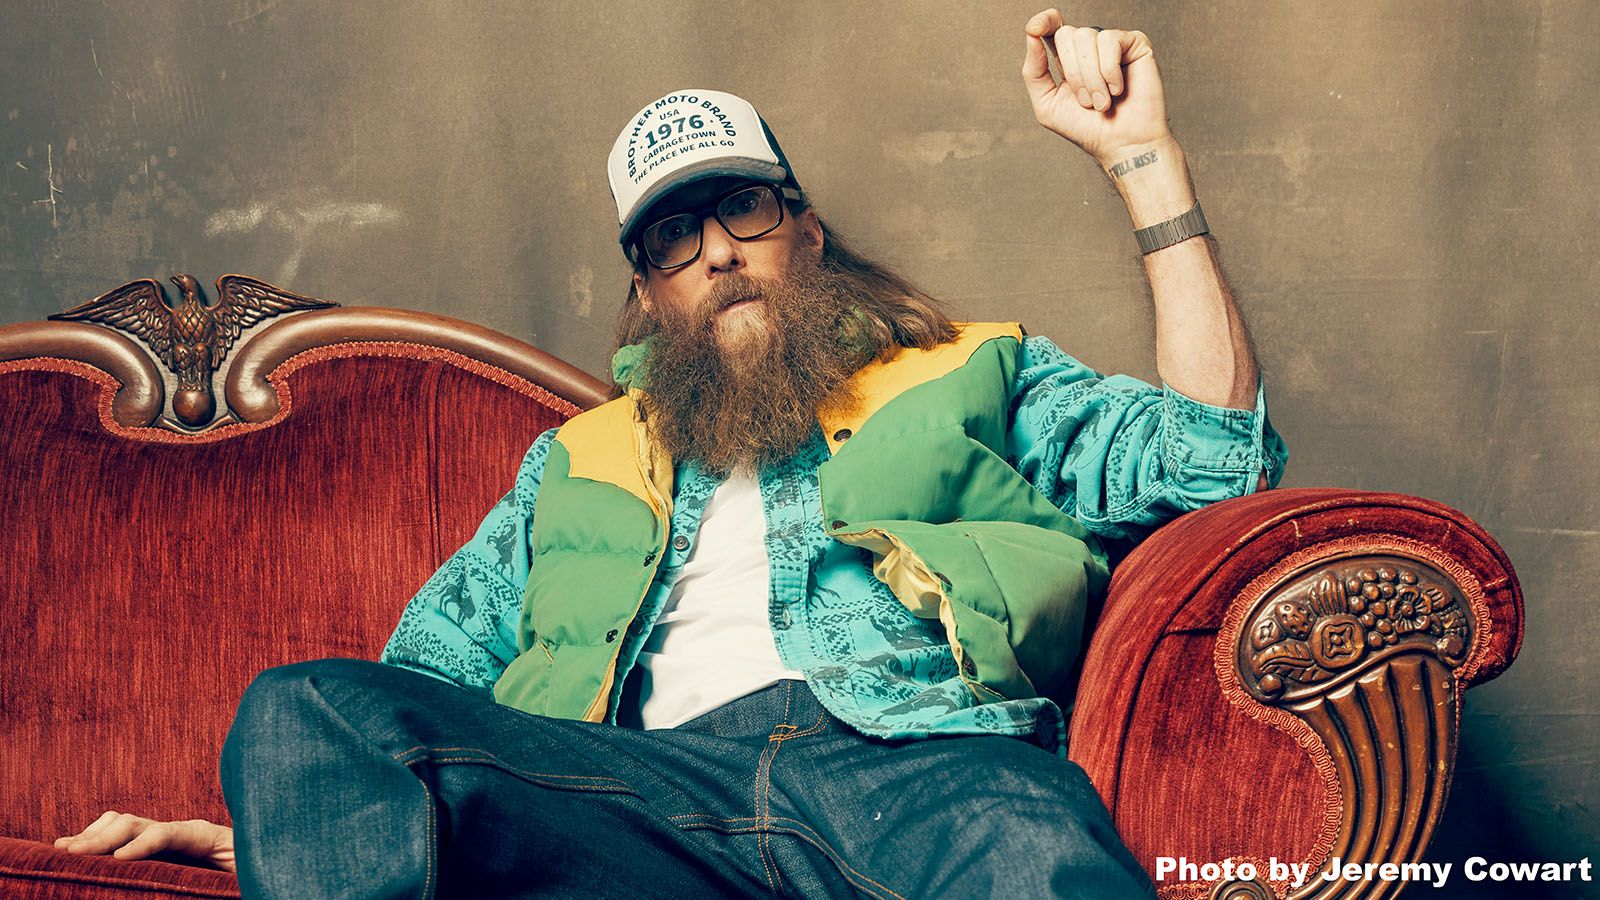 Crowder will headline STAR Fest at Double H Farms on Saturday, July 6. Along with Crowder, the contemporary Christian festival will feature Blessing Offor, Doe, Caleb & John, and Canvas.